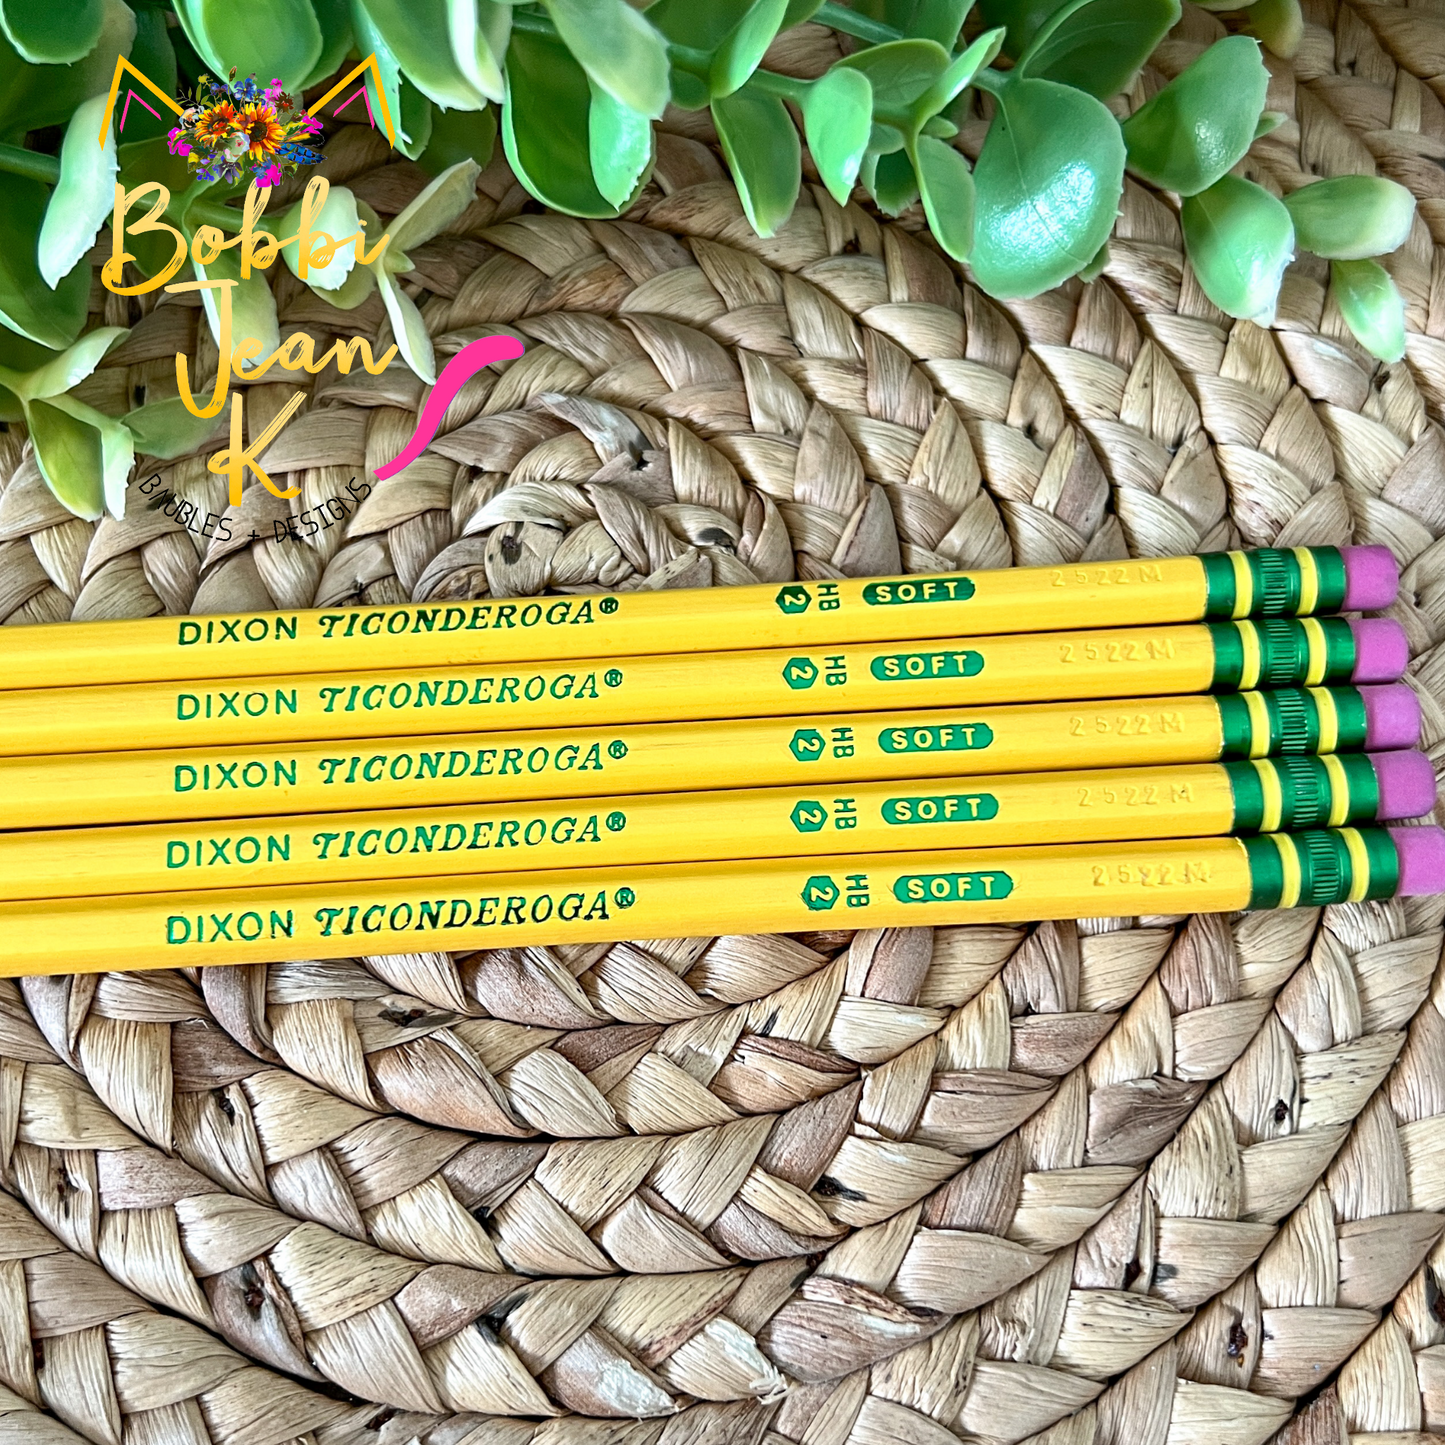 Custom Personalized Engraved Ticonderoga Pencils - Choose Traditional Yellow or Pastel Colors - PLEASE COMPLETE PERSONALIZATION BOXES (BOXES WILL APPEAR UNDER TITLE)